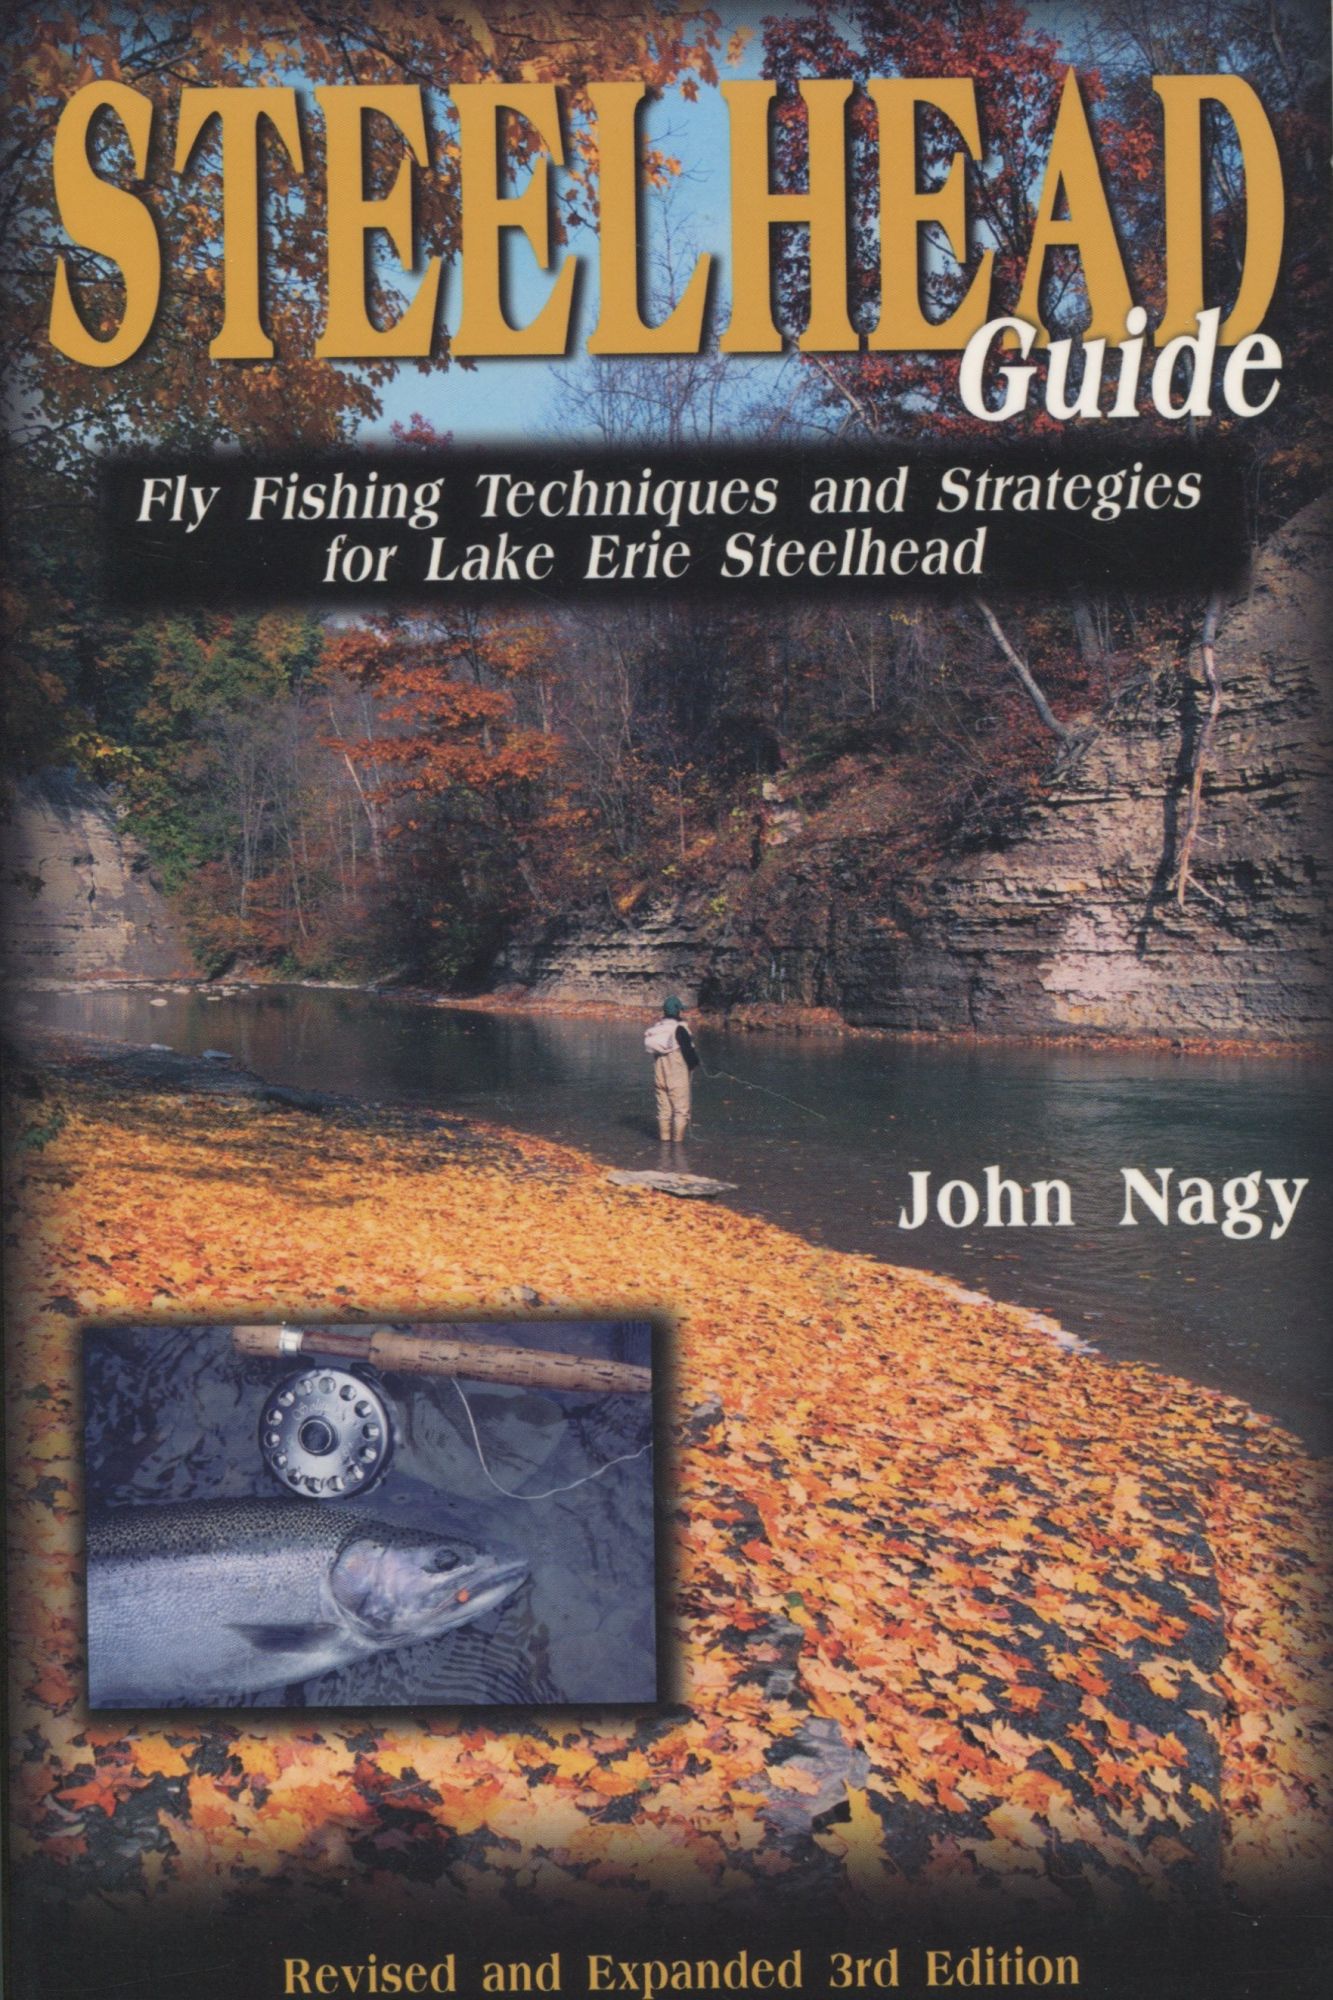 Guide To Fly-Fishing Techniques And Tactics